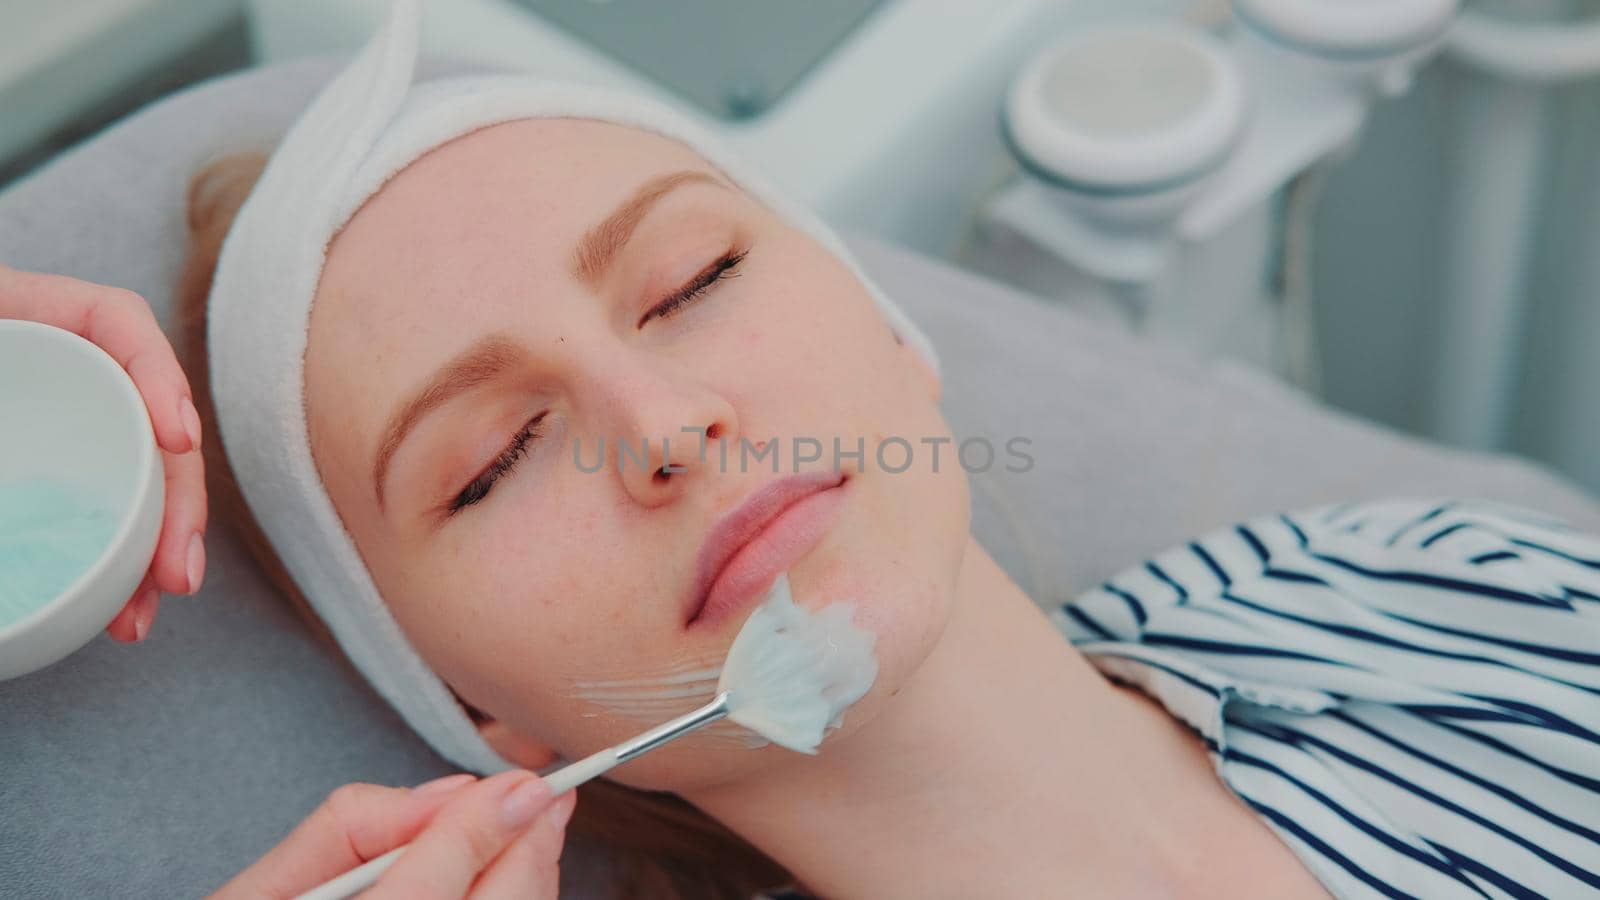 Cosmetician hands applying cream mask on young woman's face at beauty spa salon. Facial skin care treatments.